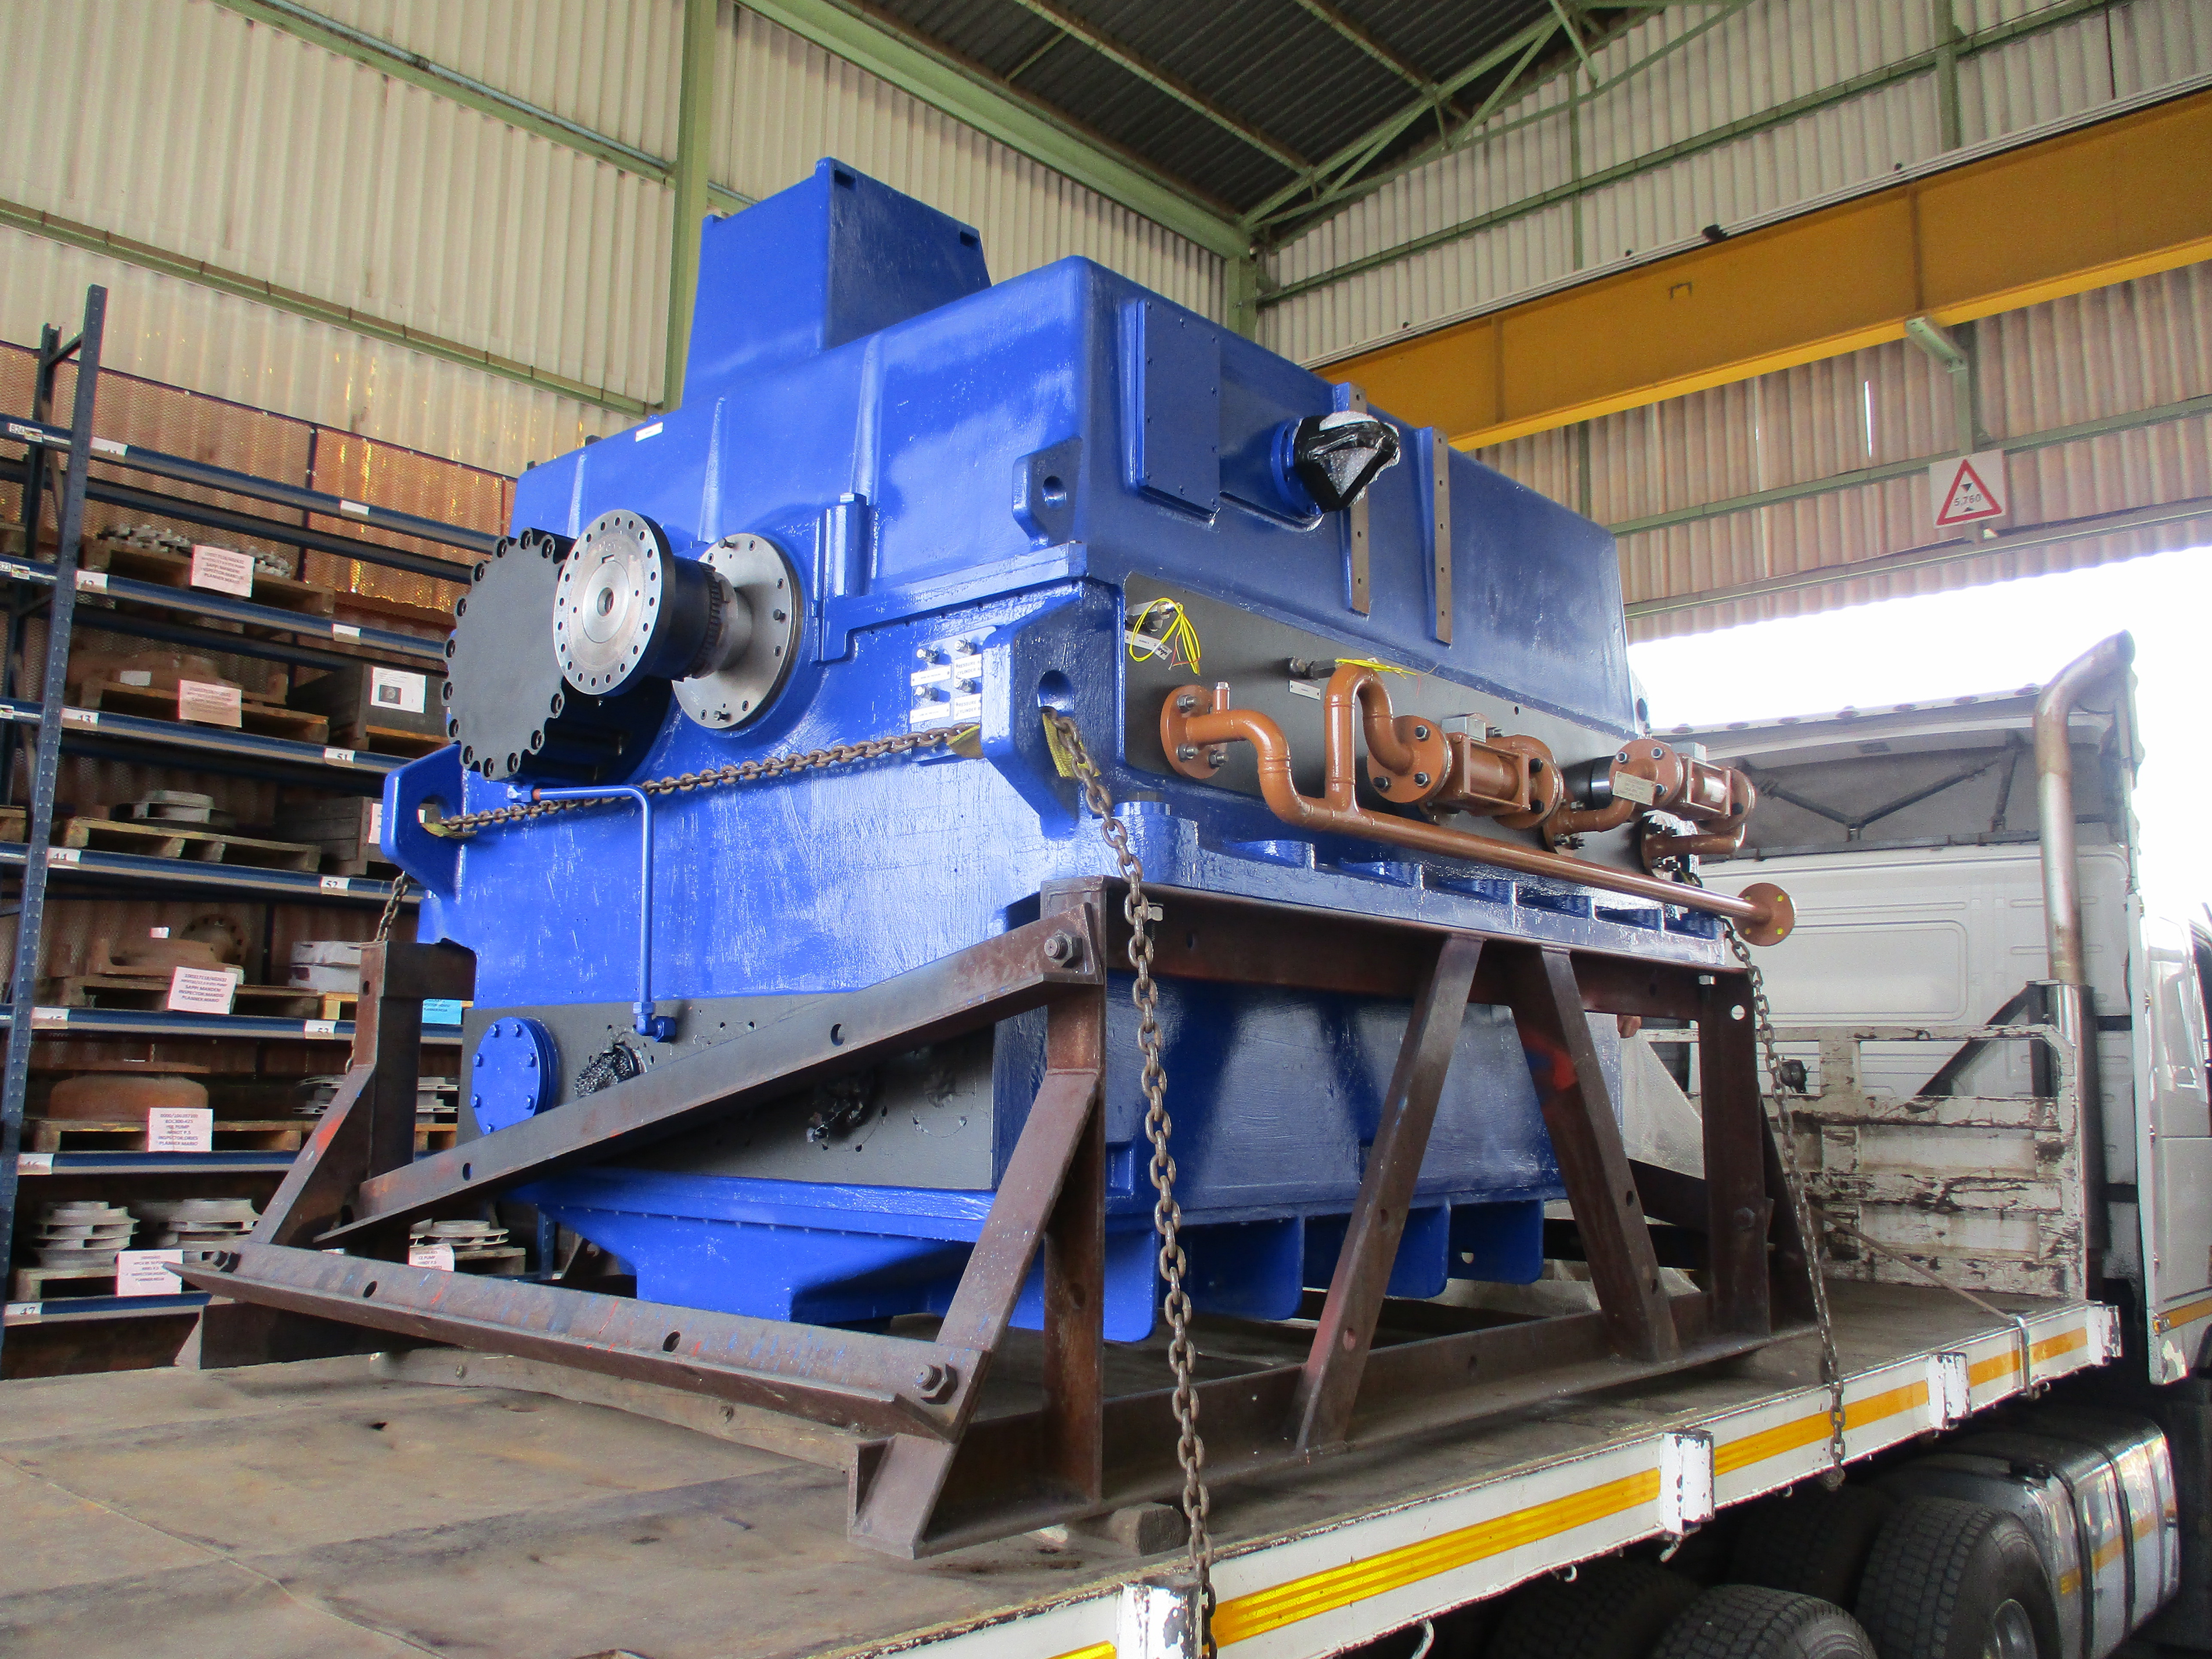 Sulzer’s work to support these gearboxes has been vital in helping Eskom maintain the availability of the boiler feed pumps